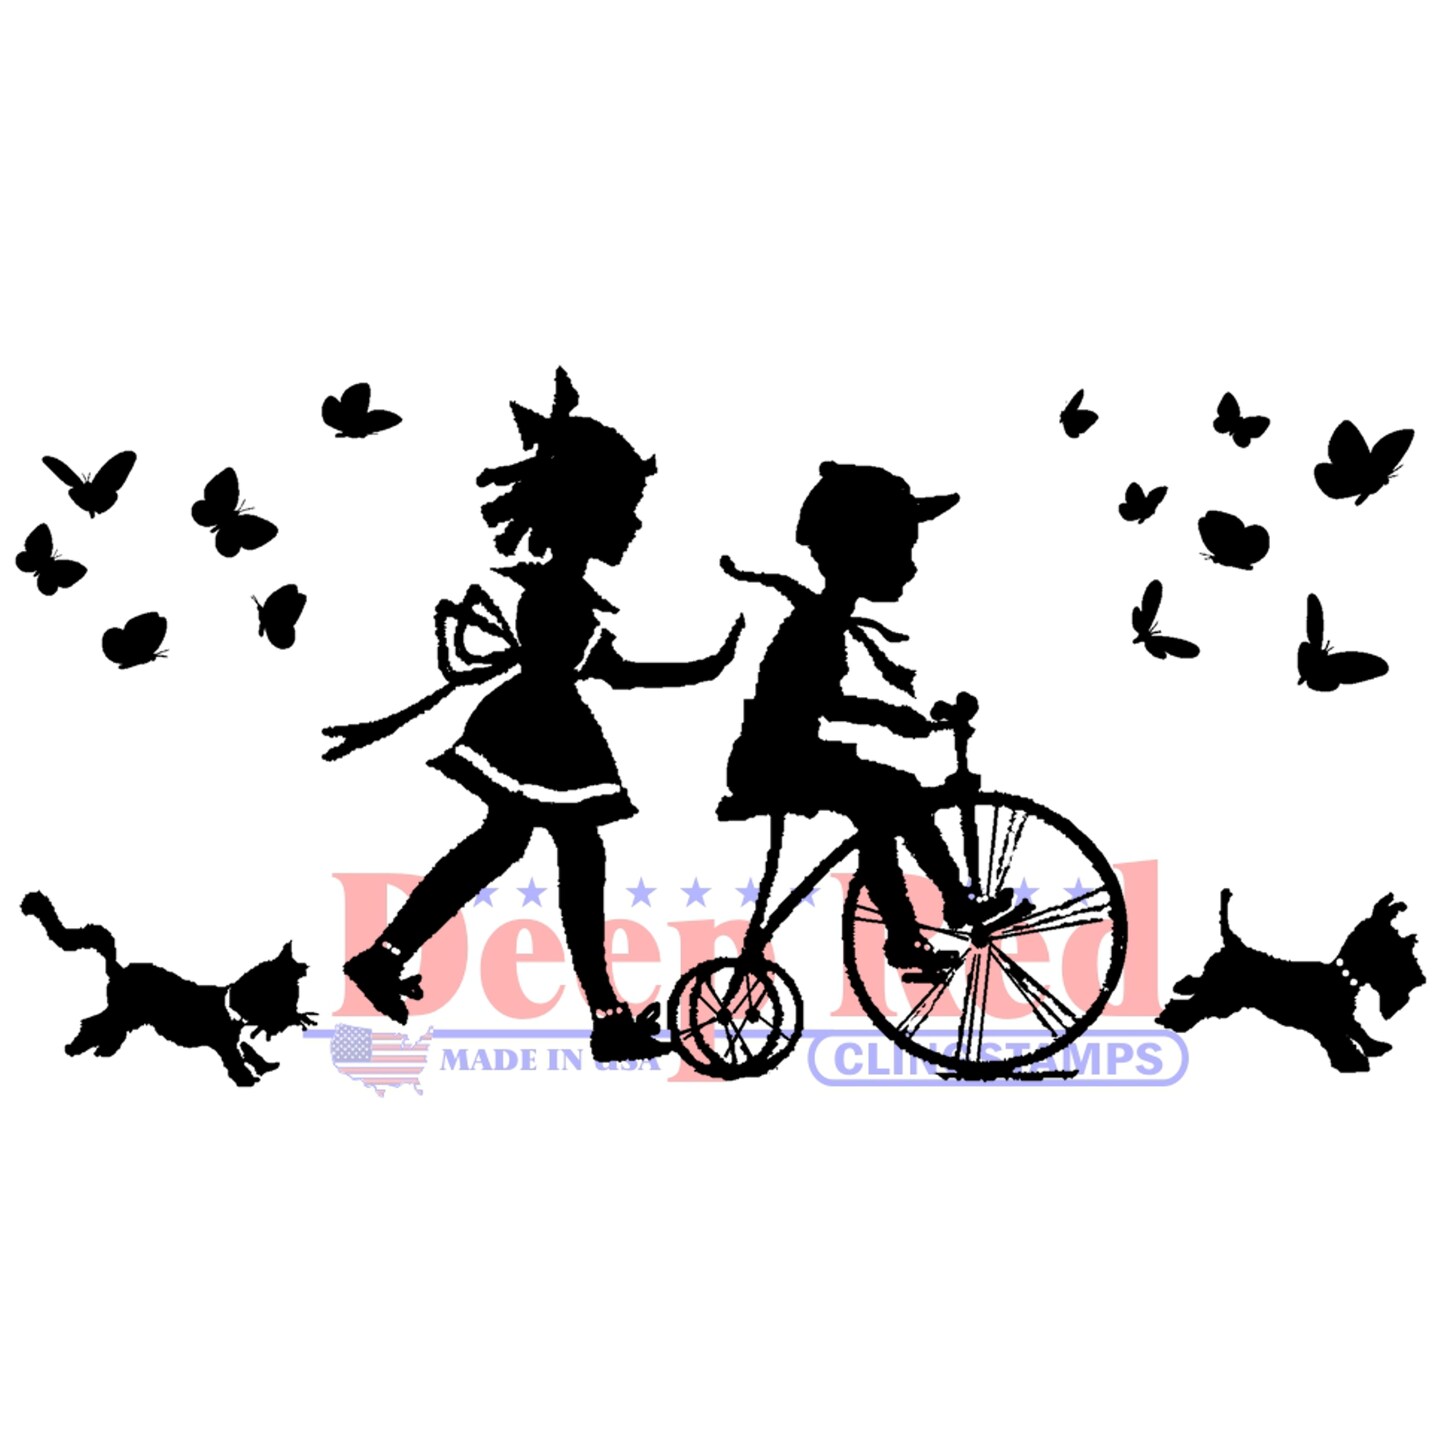 Deep Red Stamps Children Silhouette Rubber Cling Stamp 3.2 x 1.5  inches